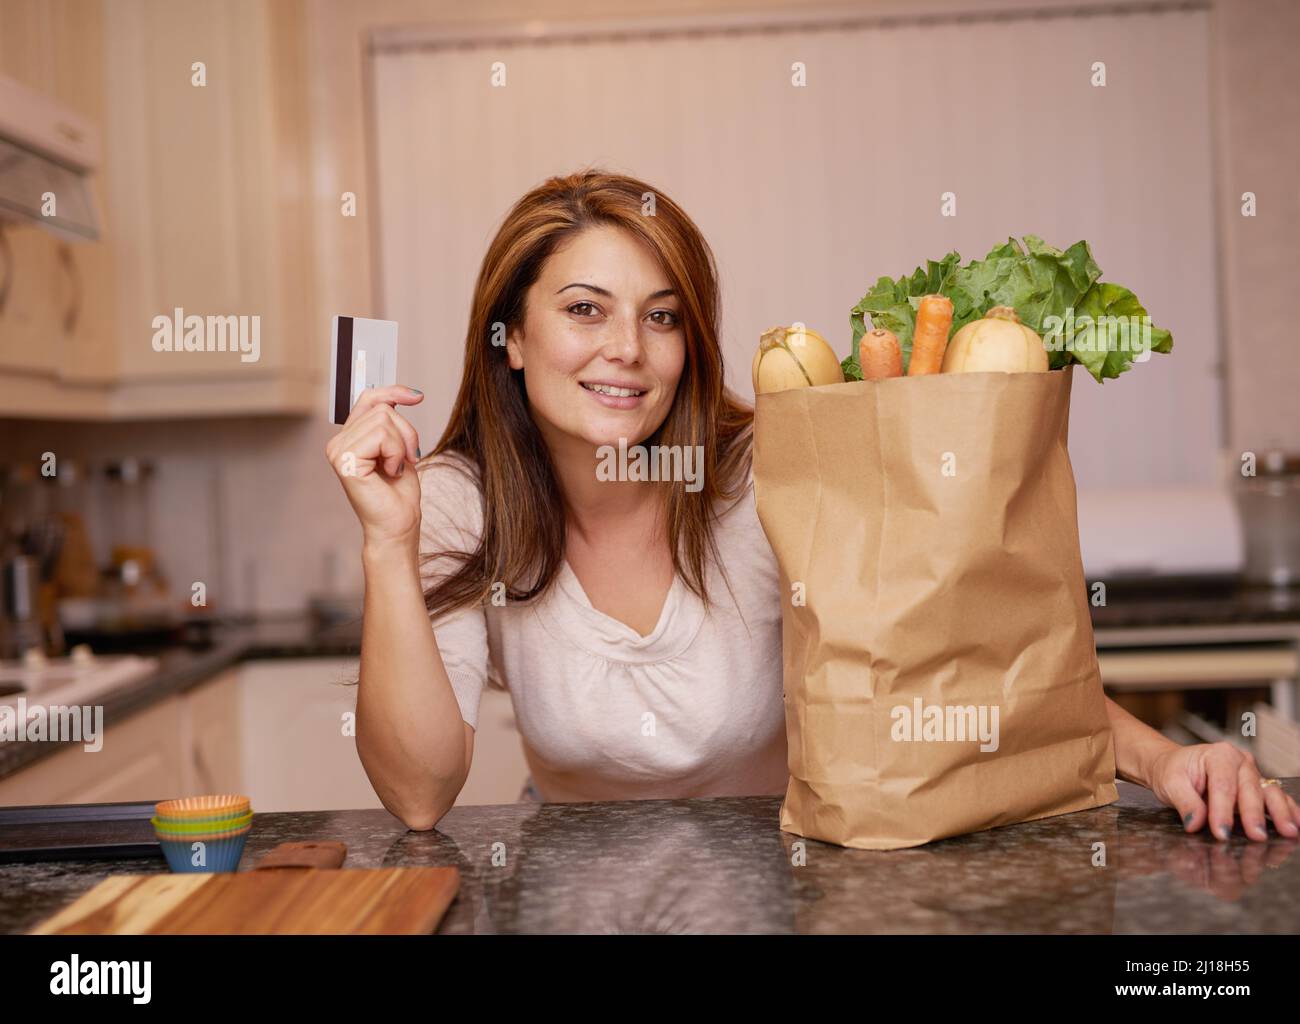 Shes a satisfied shopper. Portrait of a young woman standing with a credit card and groceries. Stock Photo